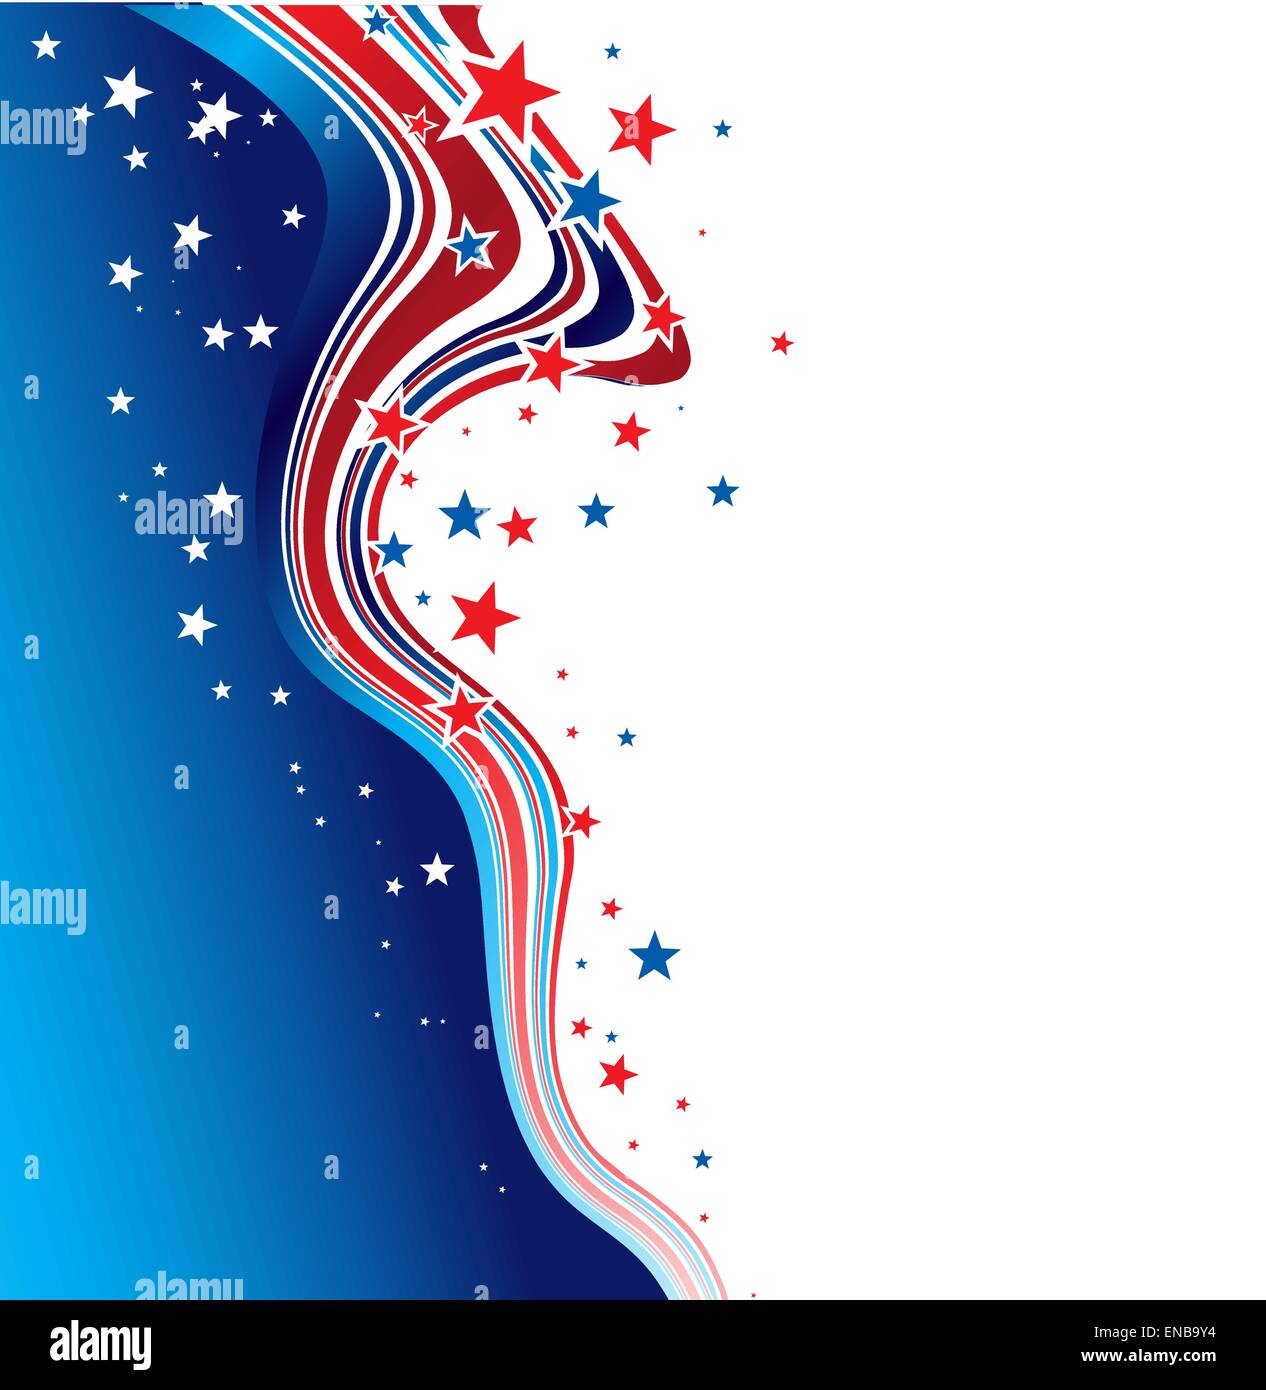 Vector illustration Independence Day patriotic background star pattern Stock Vector